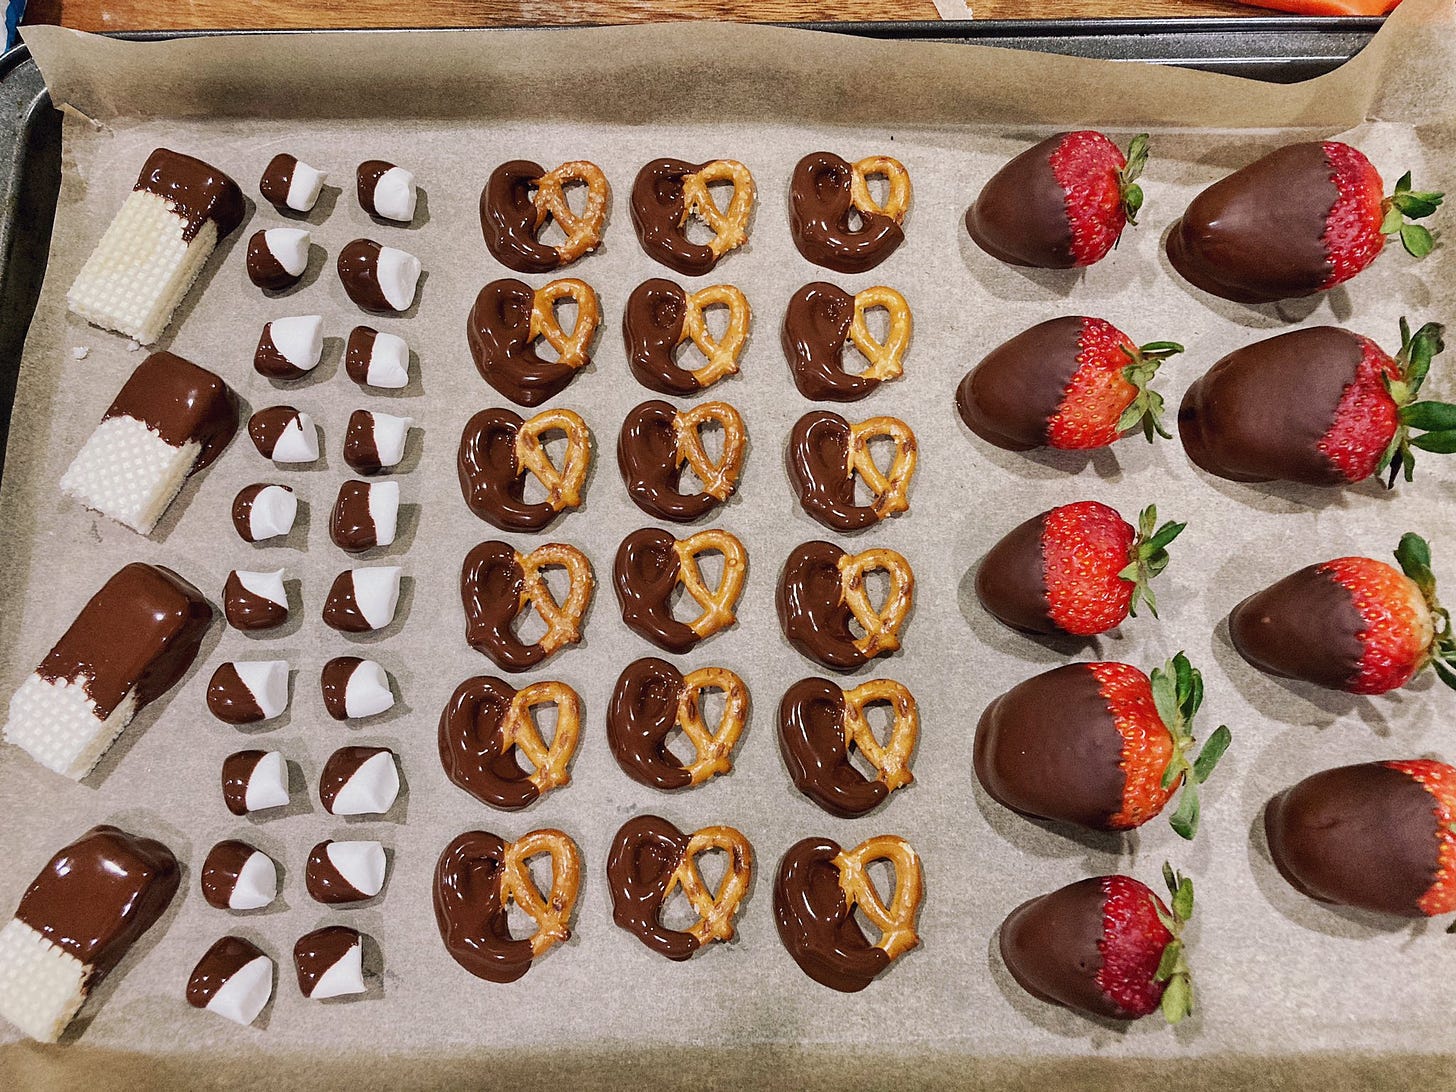 Tray with chocolate covered wafer cookies, marshmallows, pretzels, and strawberries.